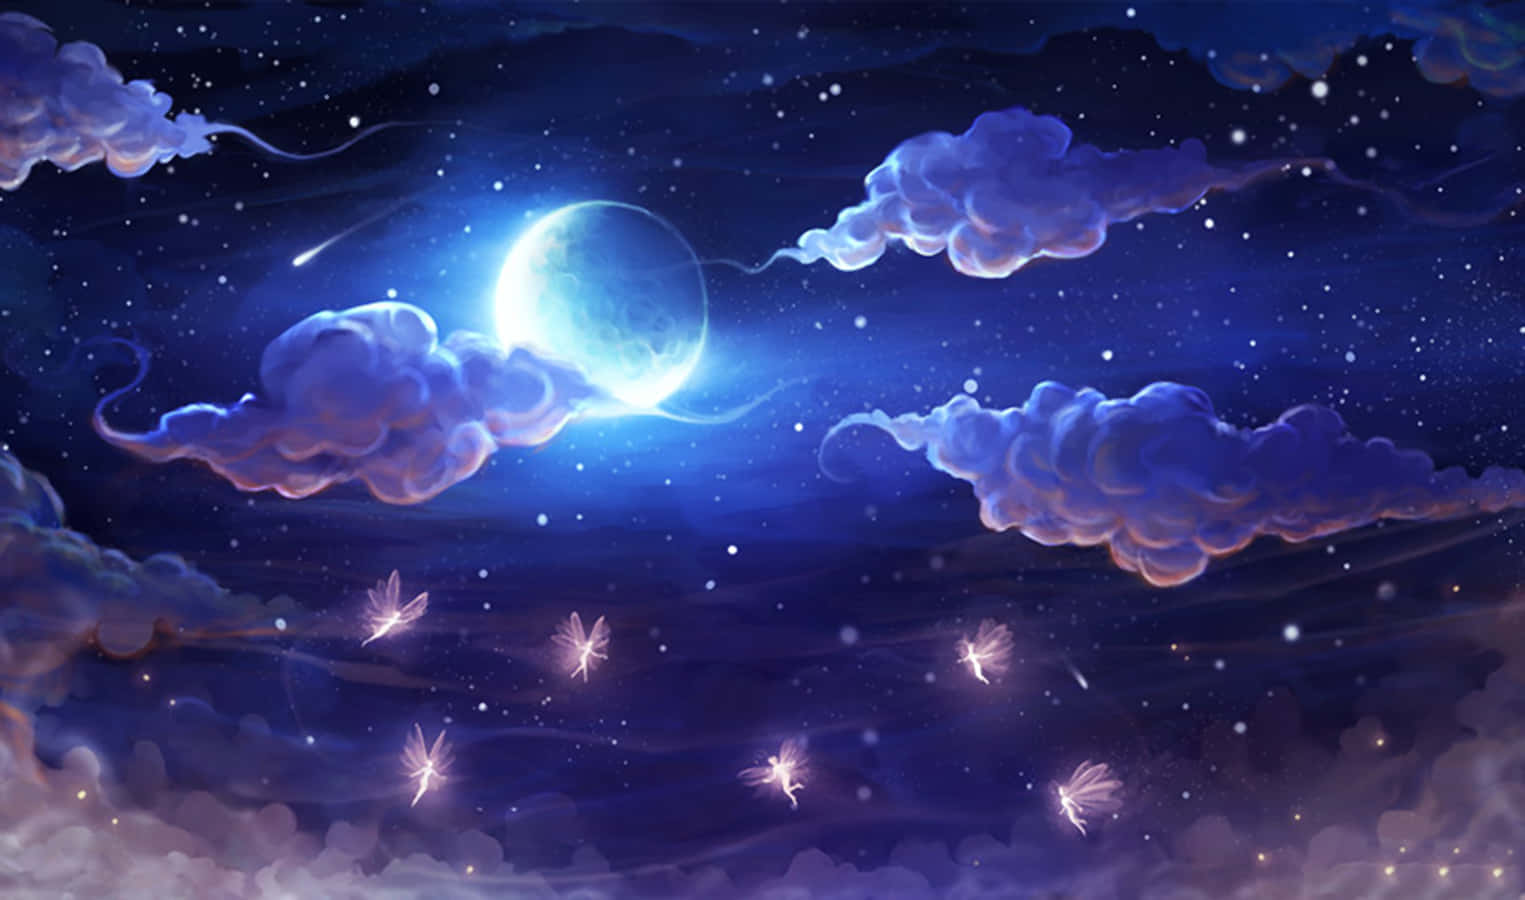 Magical Night Sky With Many Glowing Fairies Wallpaper